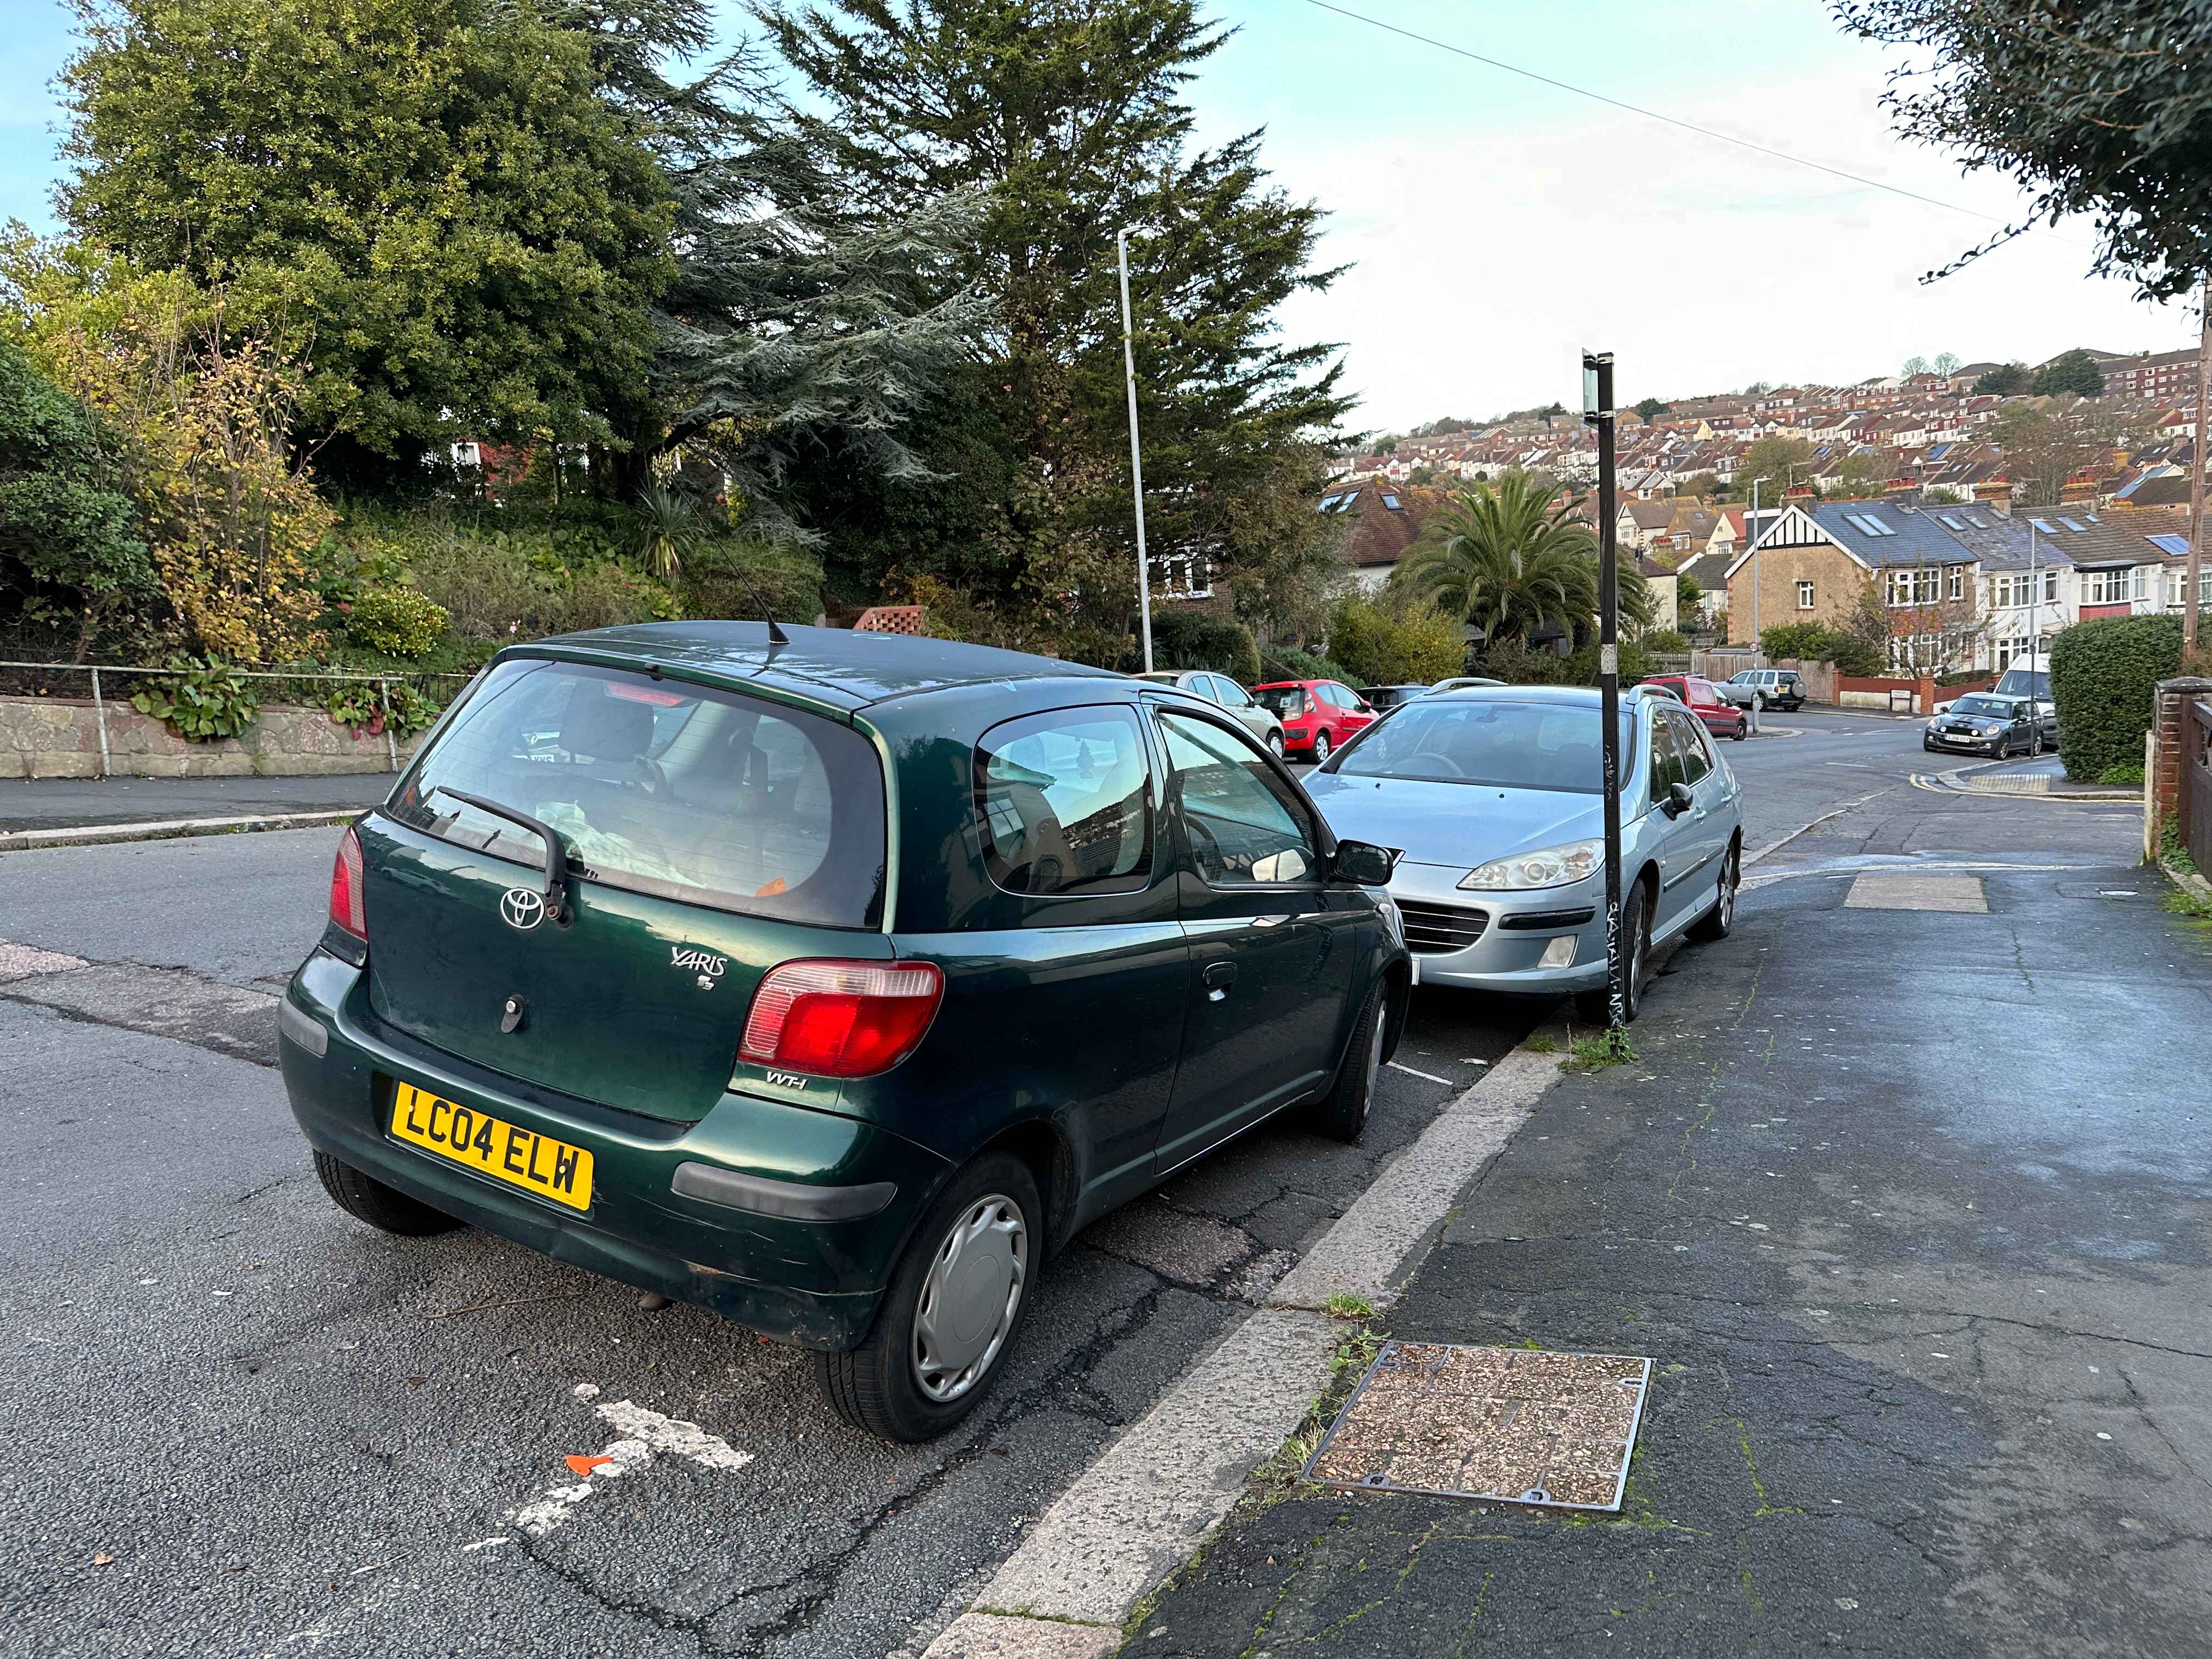 Photograph of LC04 ELW - a Green Toyota Yaris parked in Hollingdean by a non-resident. The ninth of ten photographs supplied by the residents of Hollingdean.